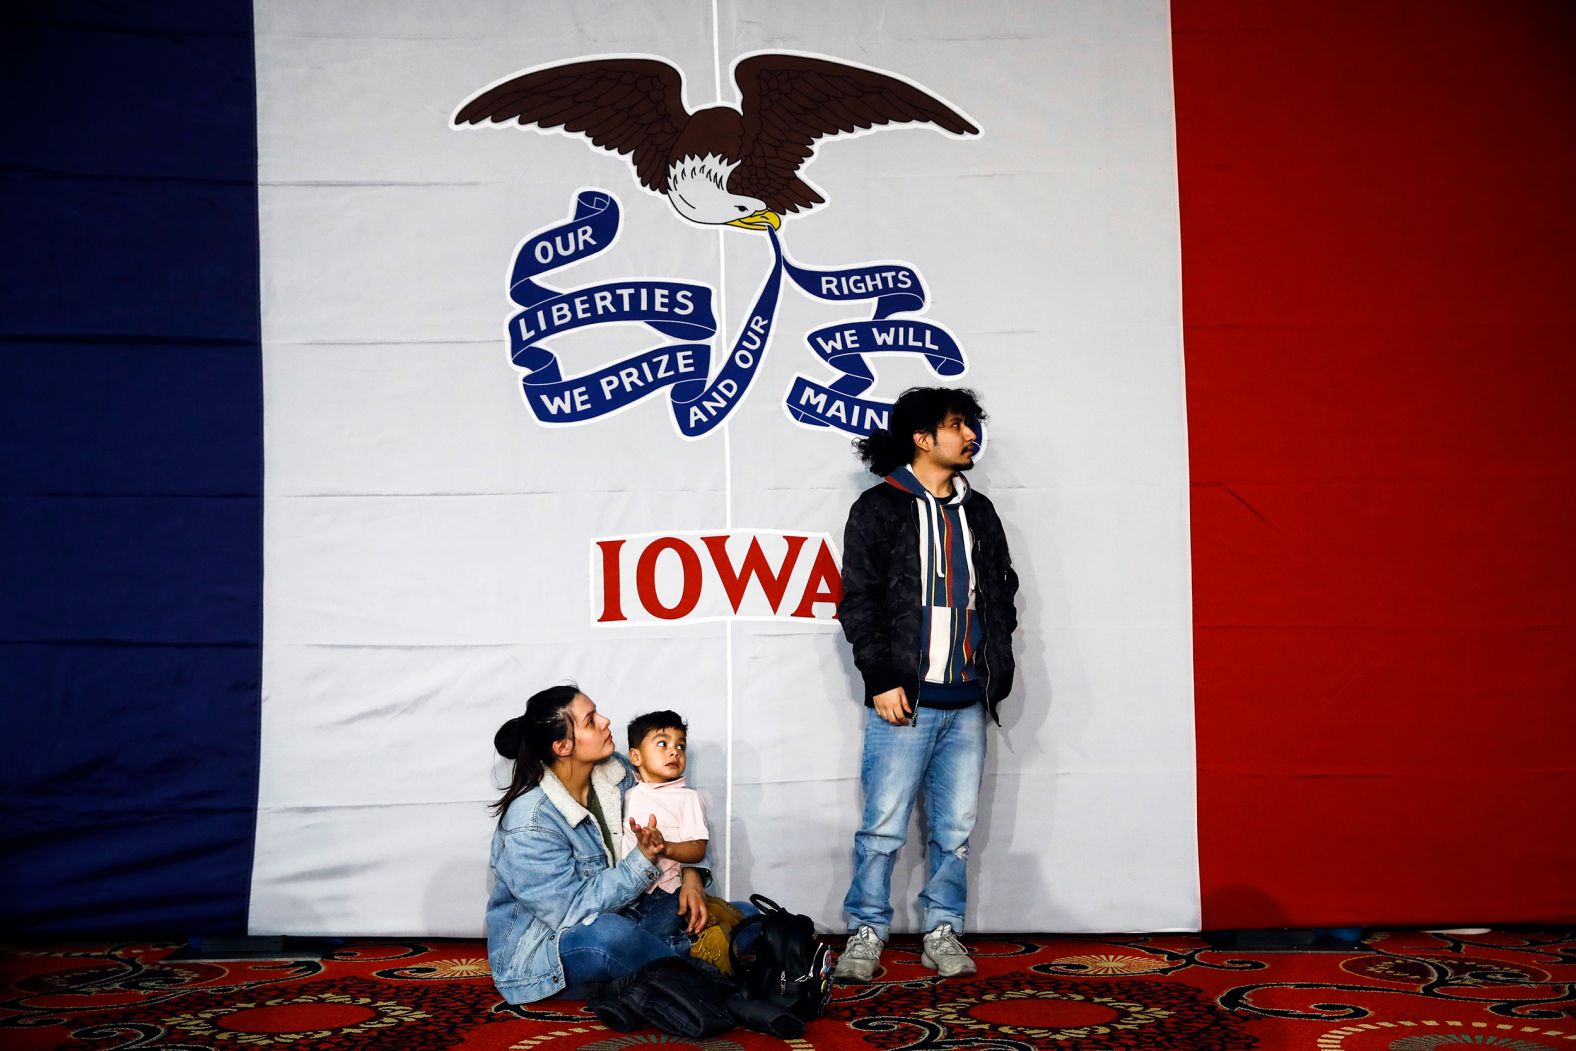 Natalie Serrano and Isaac Garcia — along with their 2-year-old son, Leonel — wait for caucus returns to come in at a Sanders rally in Des Moines.